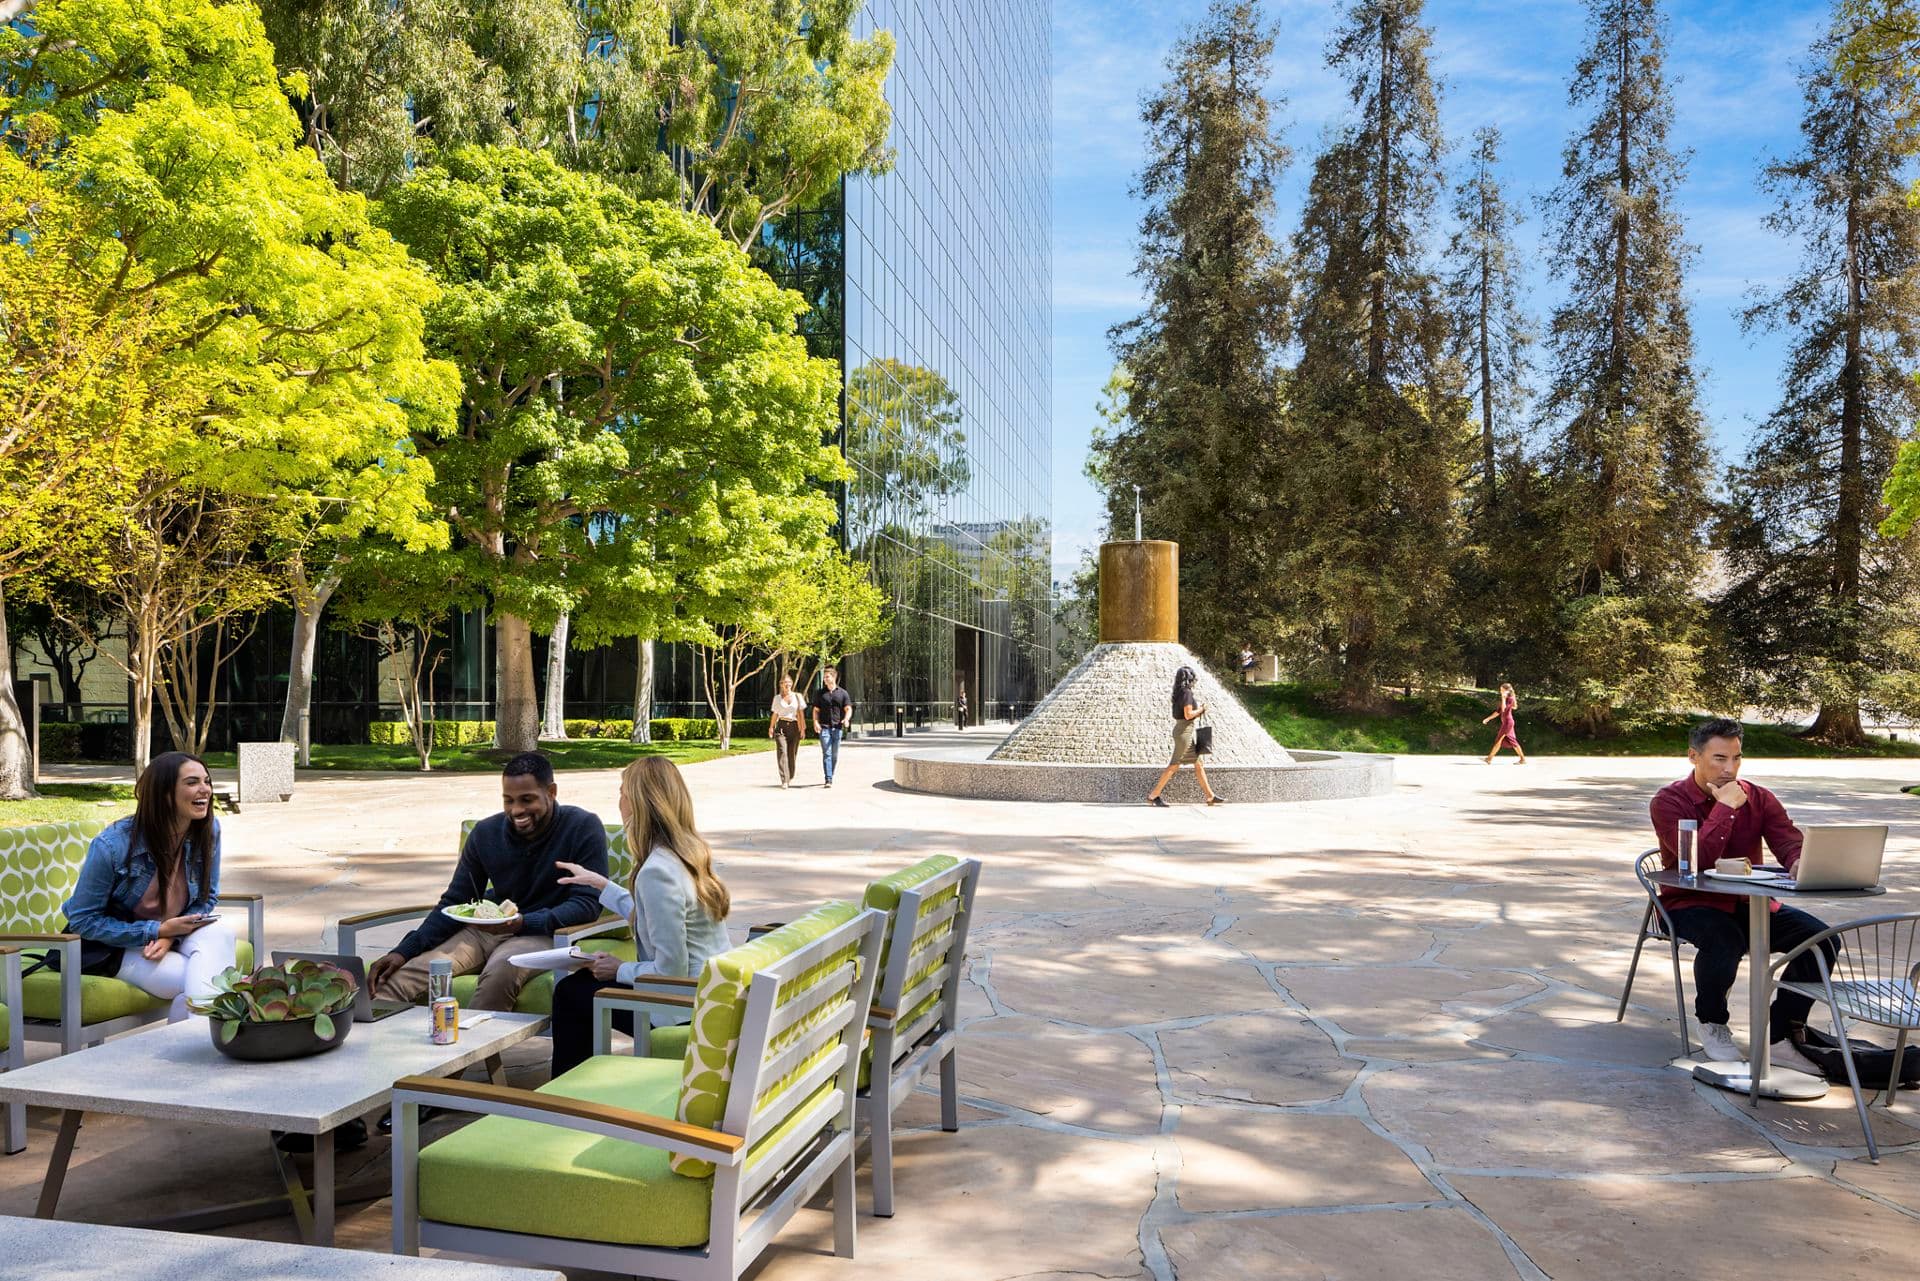 Exterior view of The Commons Outdoor workspace at Pacific Arts Plaza in Costa Mesa, CA.